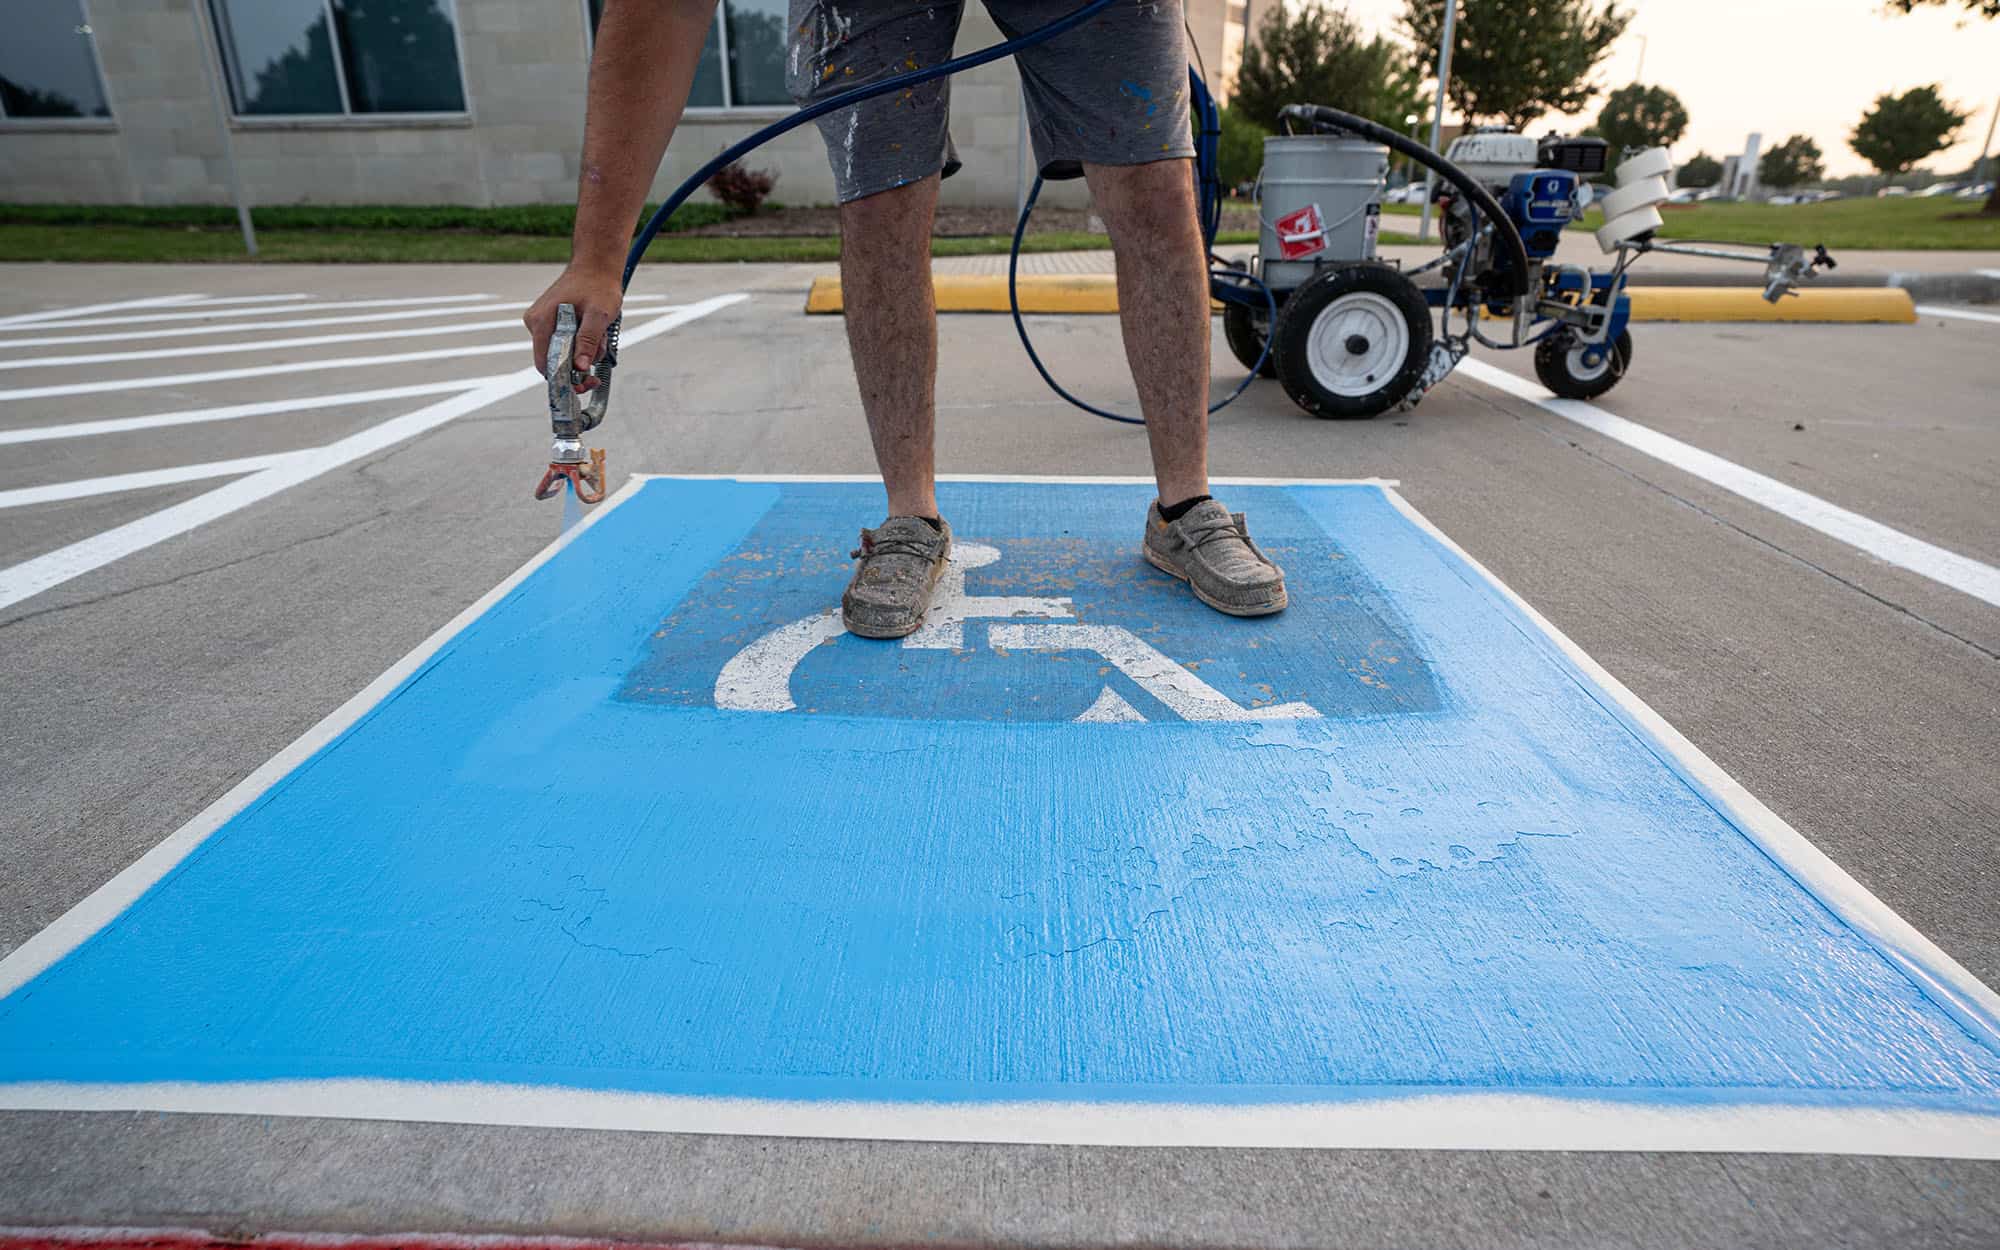 Front view of someone painting handicapped parking space